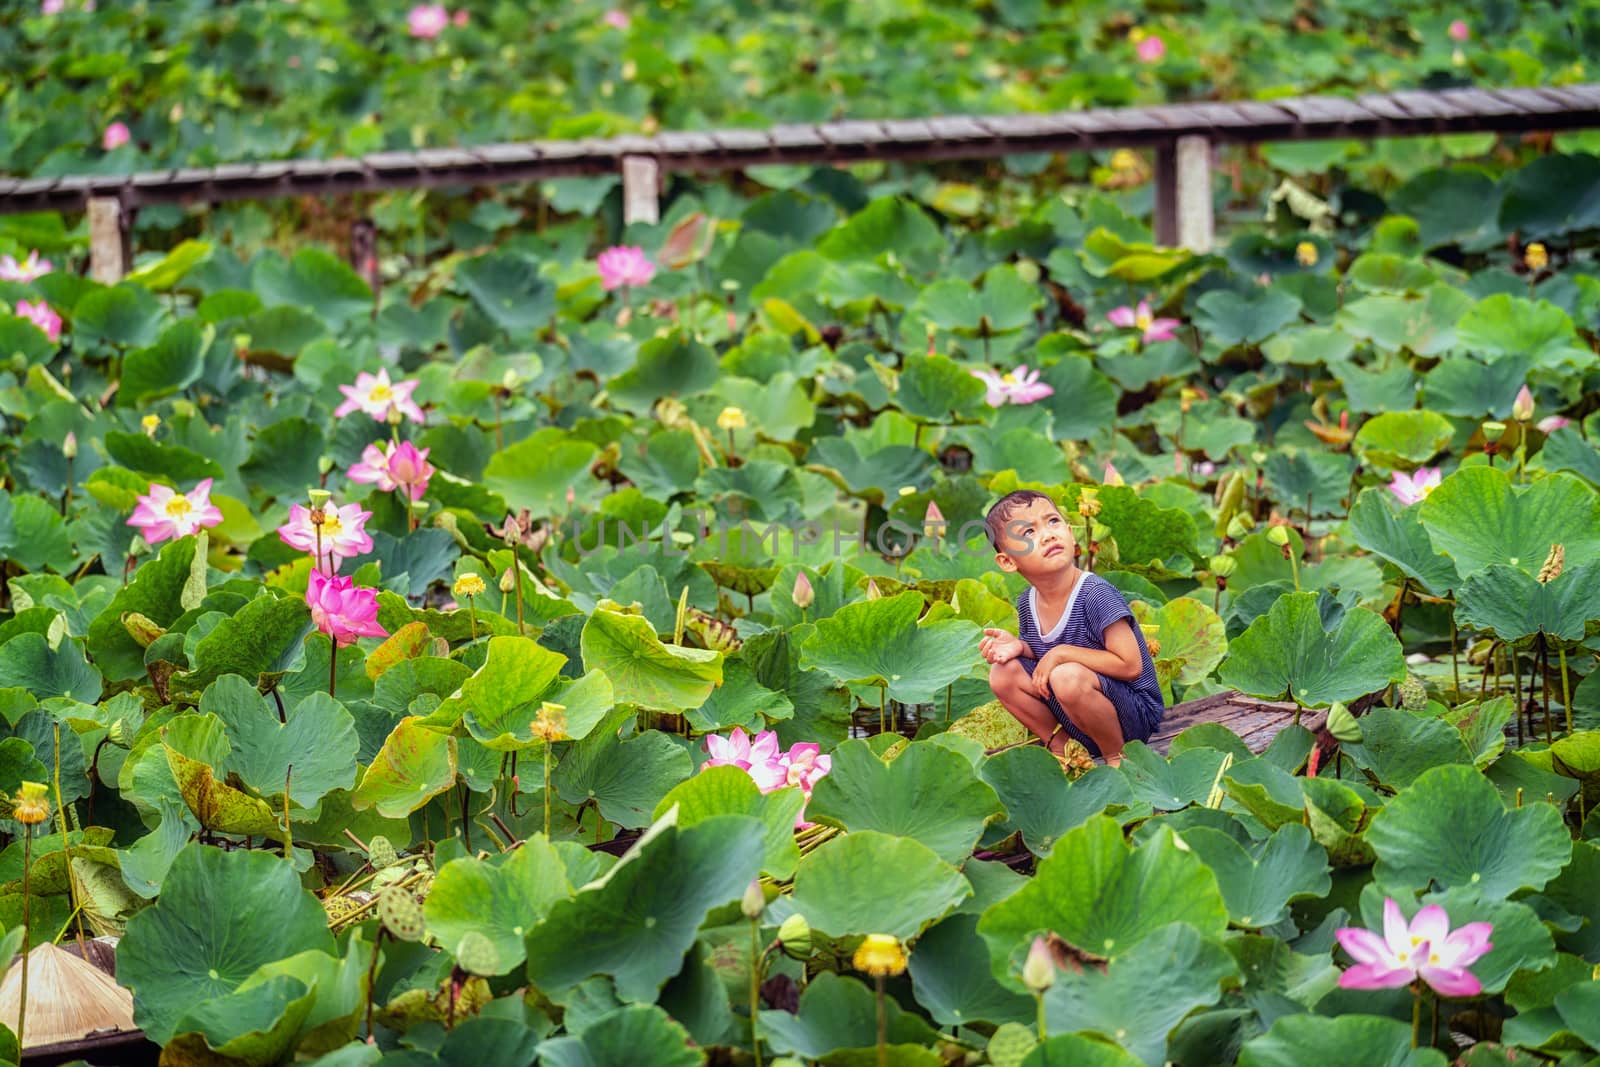 Vietnamese boy playing with the pink lotus over the traditional wooden boat in the big lake at thap muoi, dong thap province, vietnam, culture and life concept